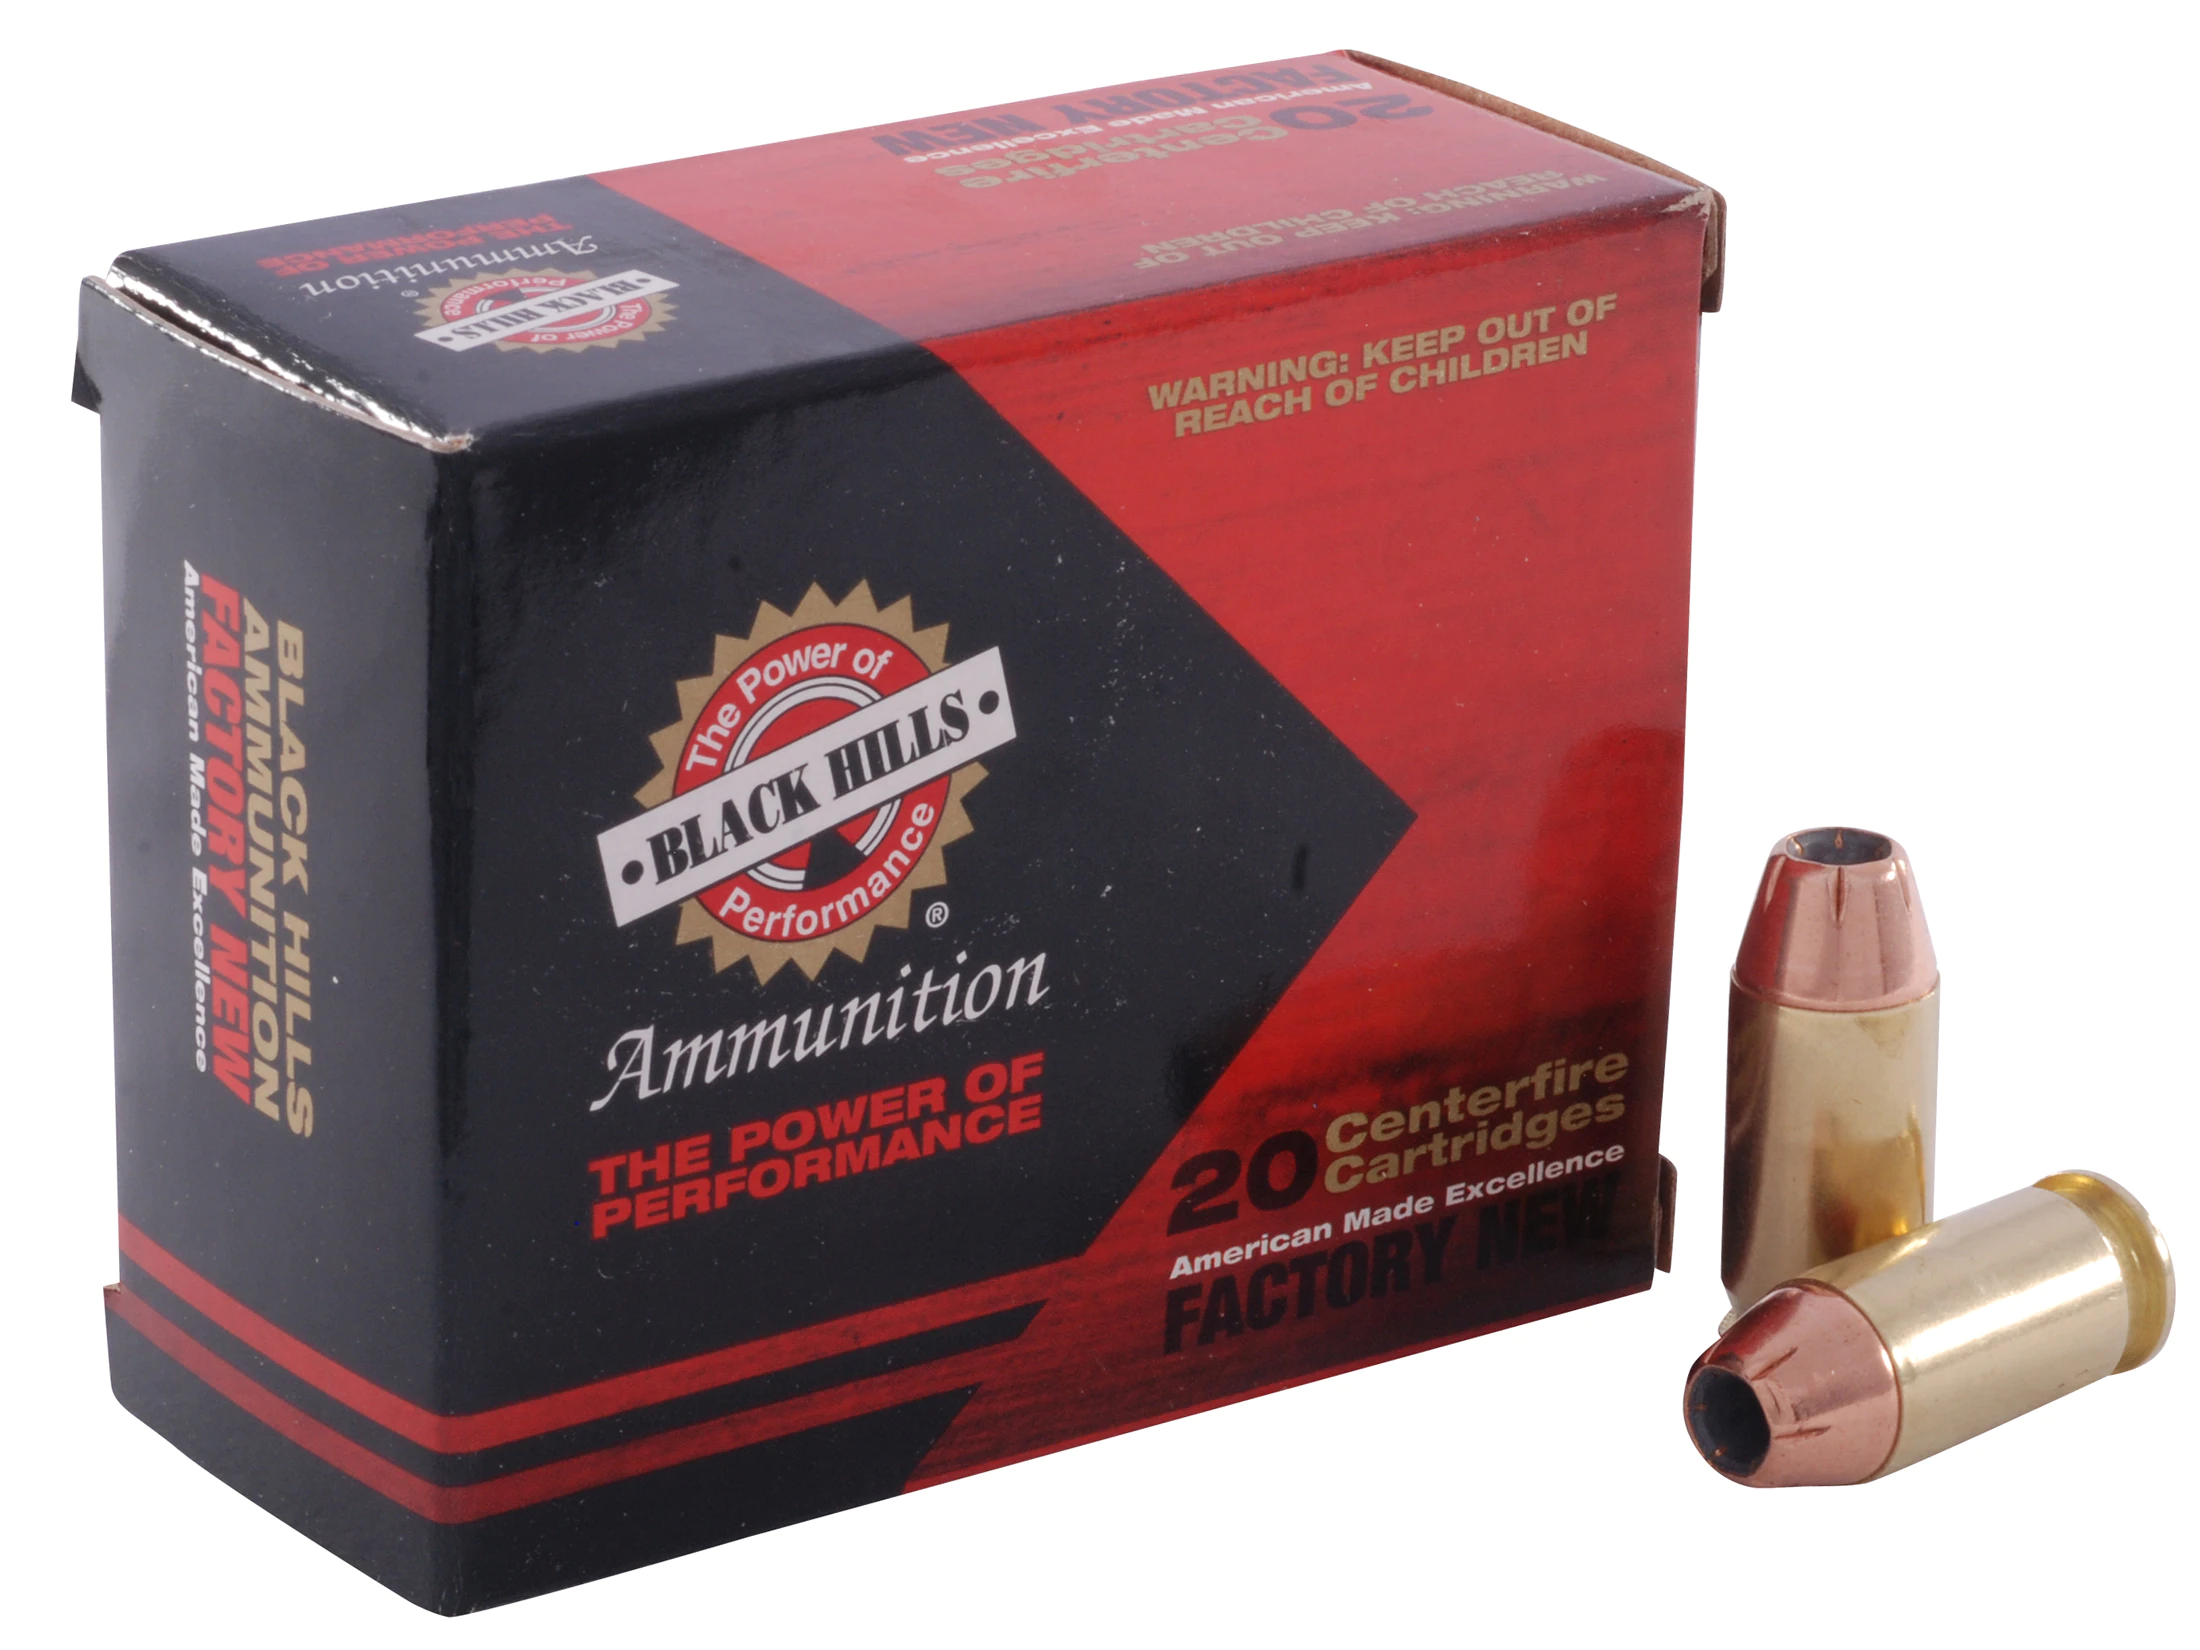 Image of Black Hills Ammunition 45 ACP 230 Grain Jacketed Hollow Point Box of 20